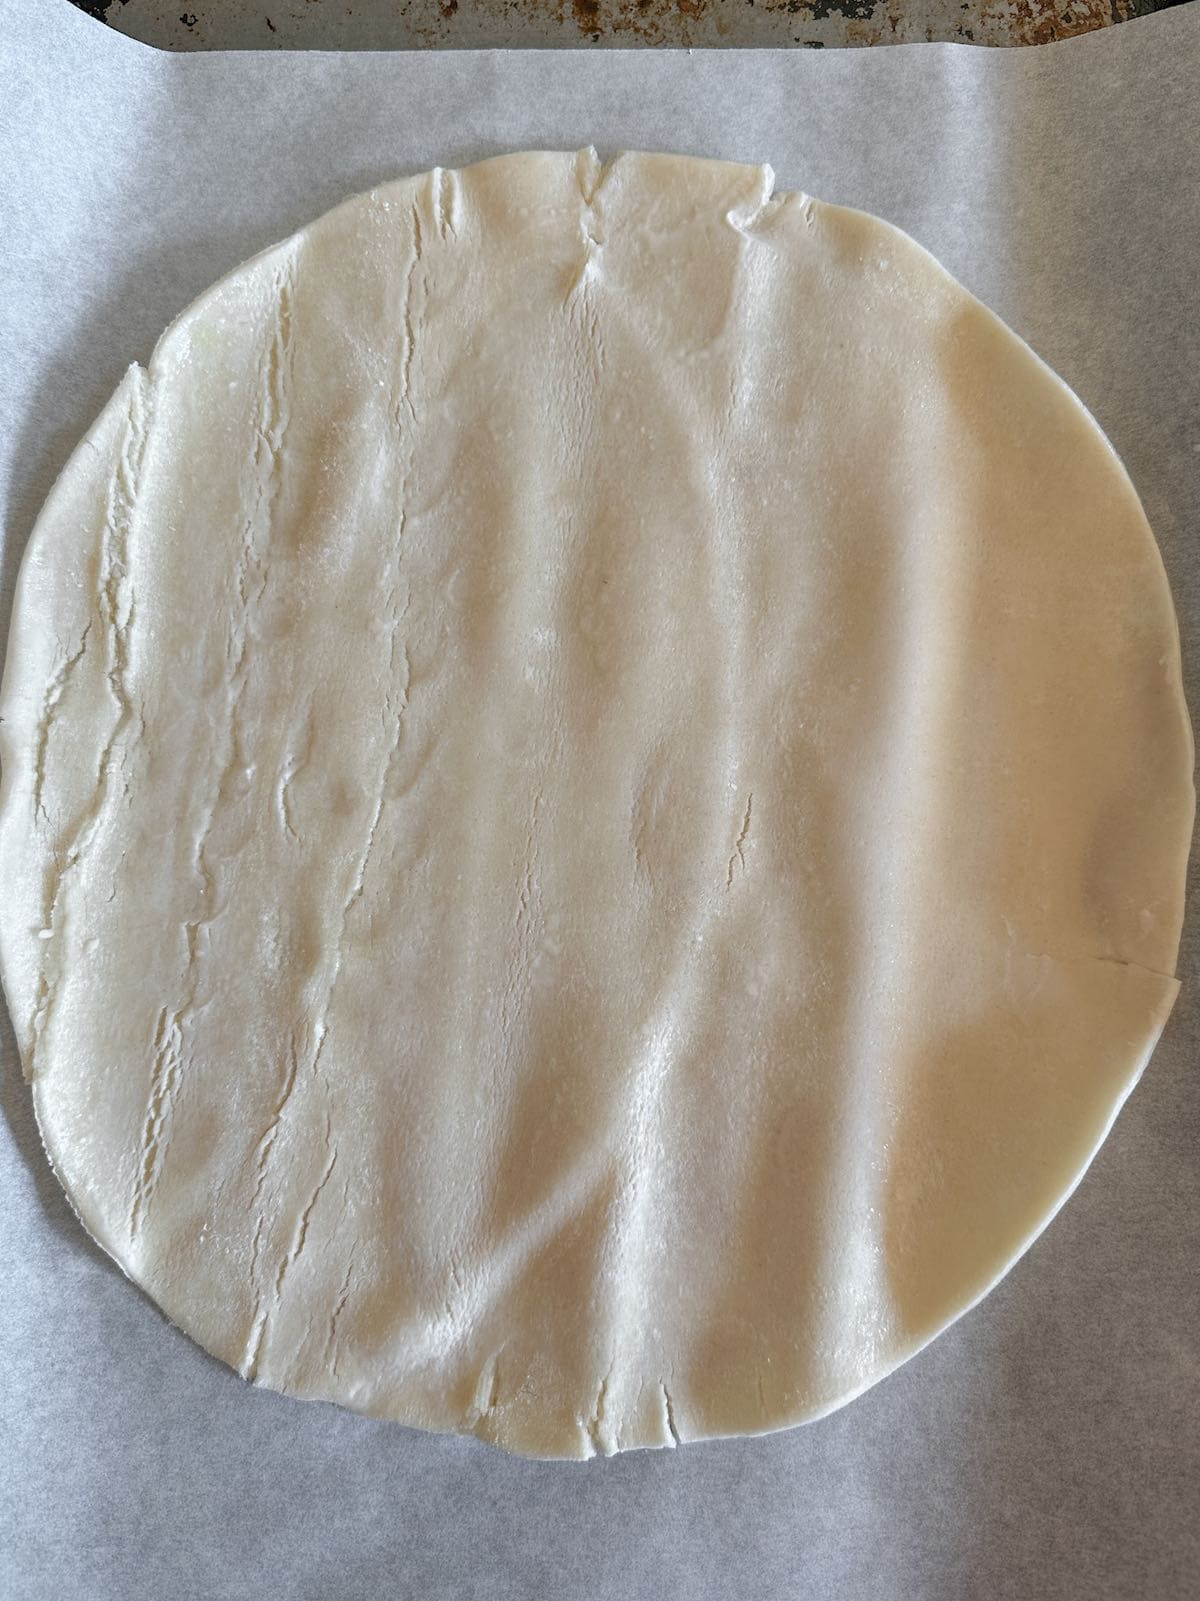 Store bought pie crust on a parchment paper covered sheet pan.